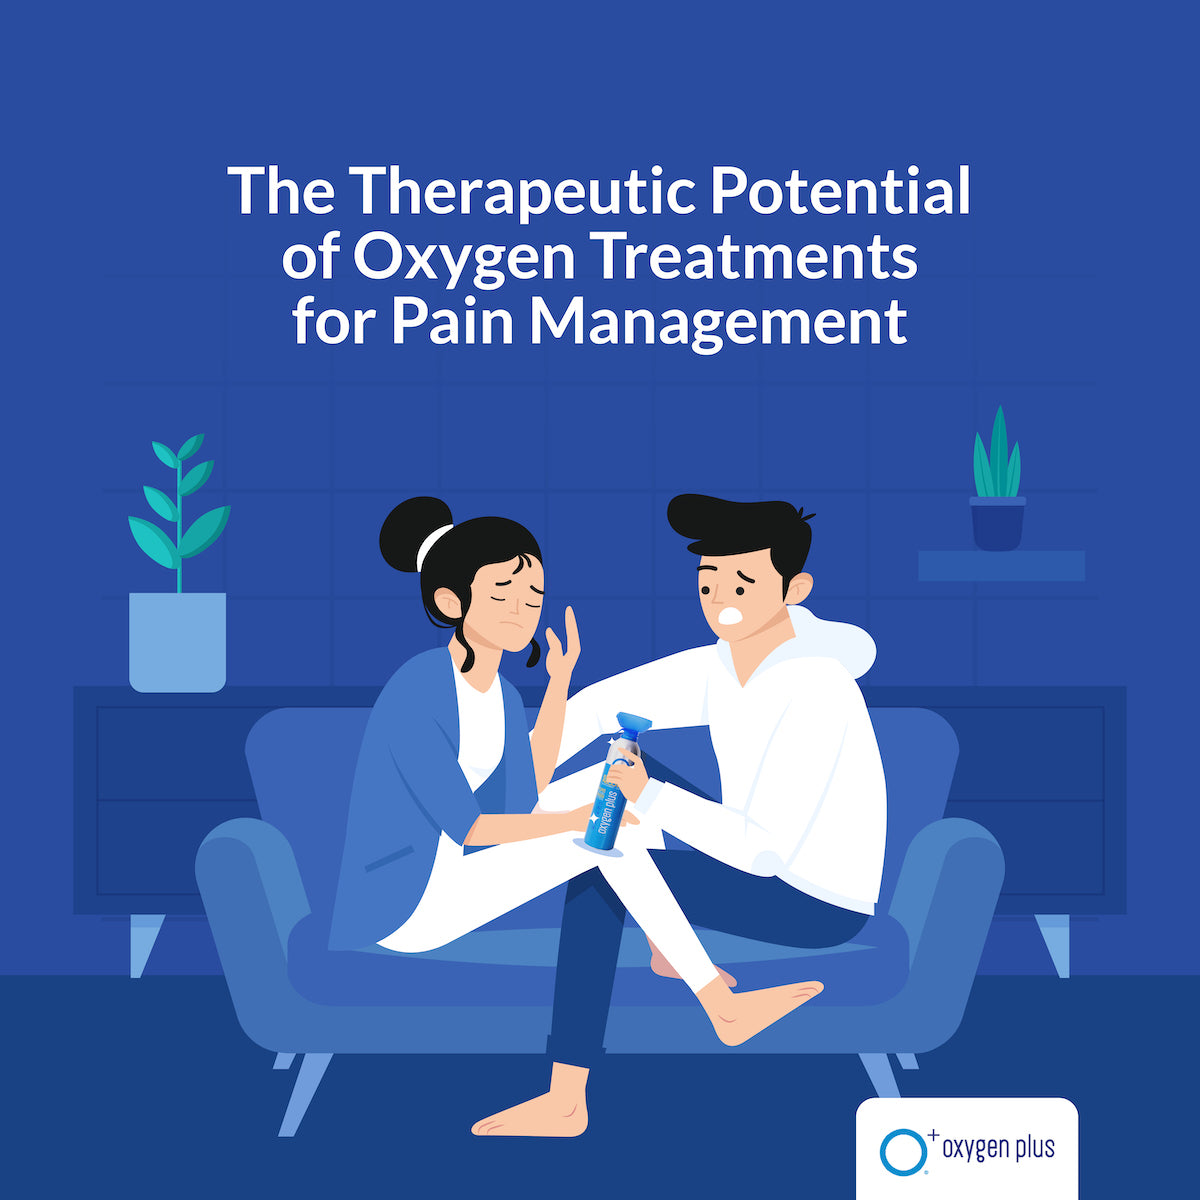 The therapeutic potential of oxygen treatments for pain management